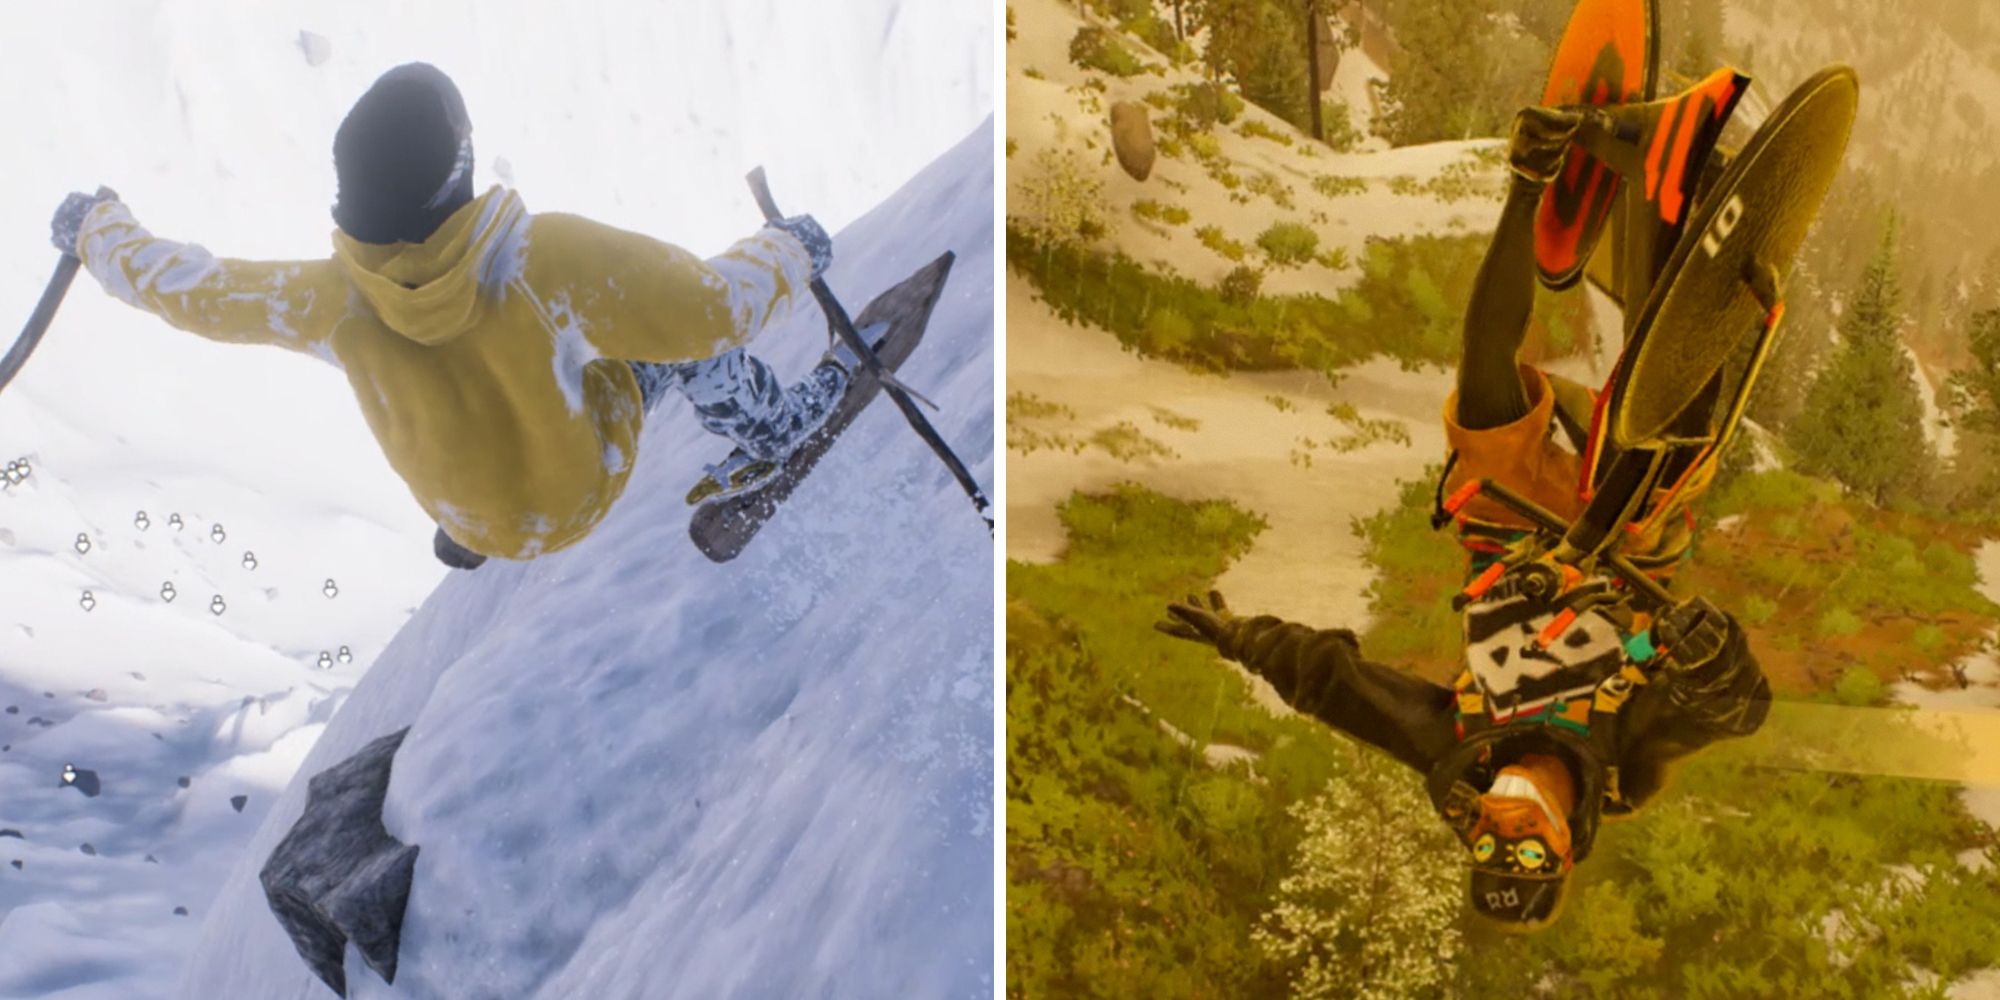 Riders Republic. Split image. Rider on the snow with skis on left. Rider performing a trick on a bike on the right.